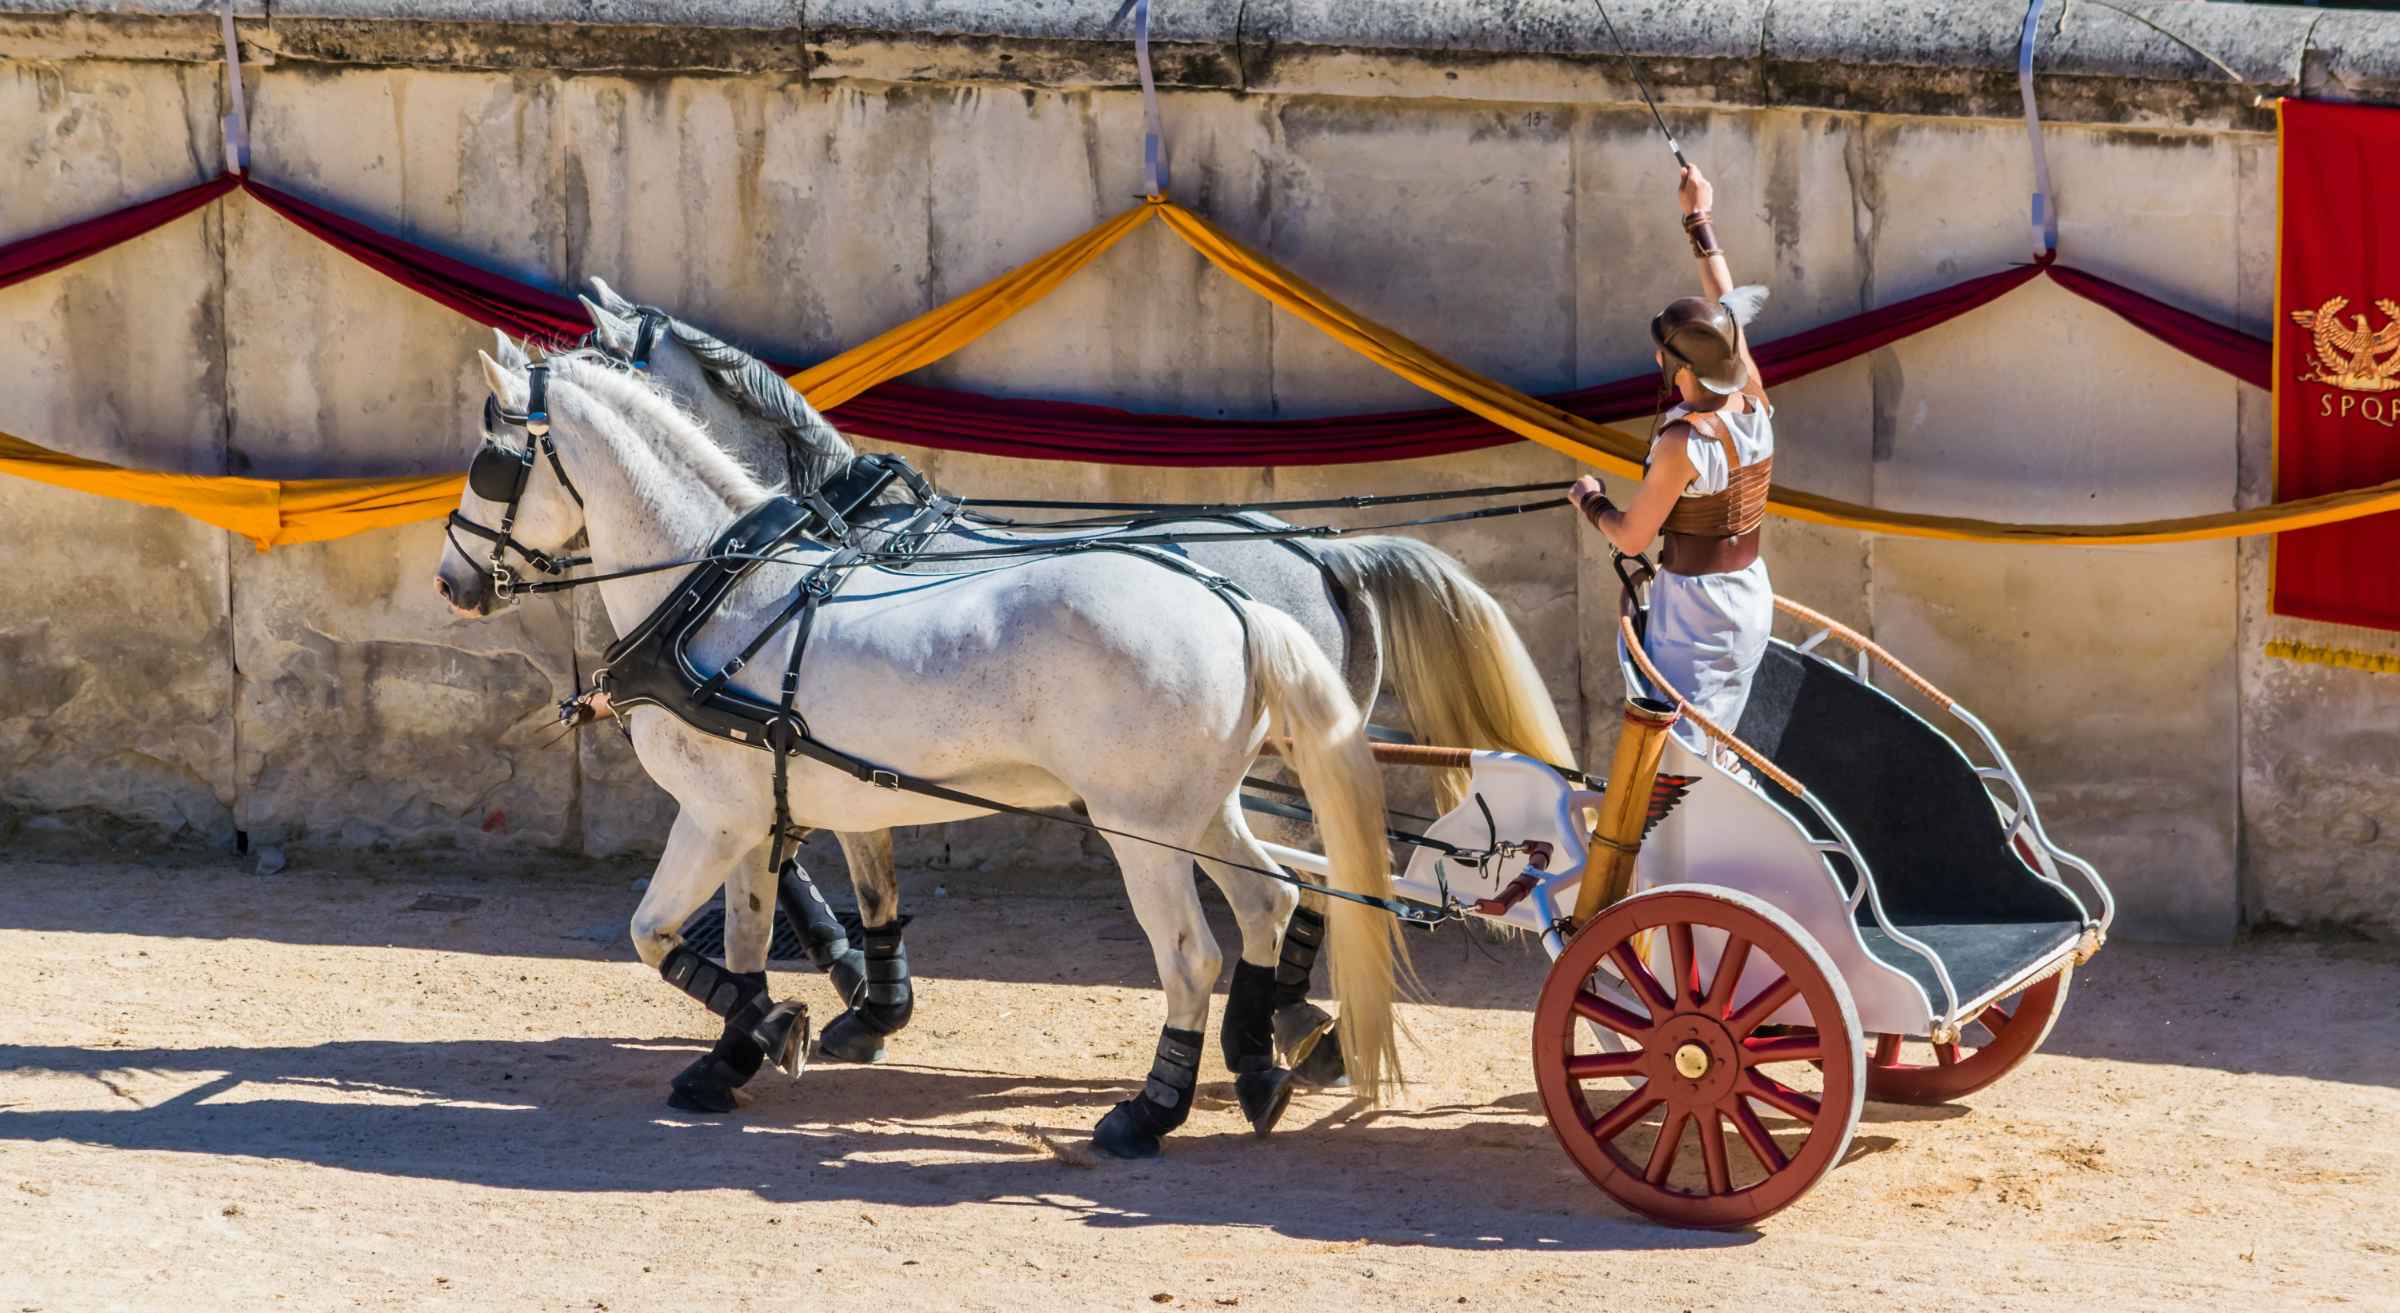 Reconstruction, in arenas, of a Roman chariot race